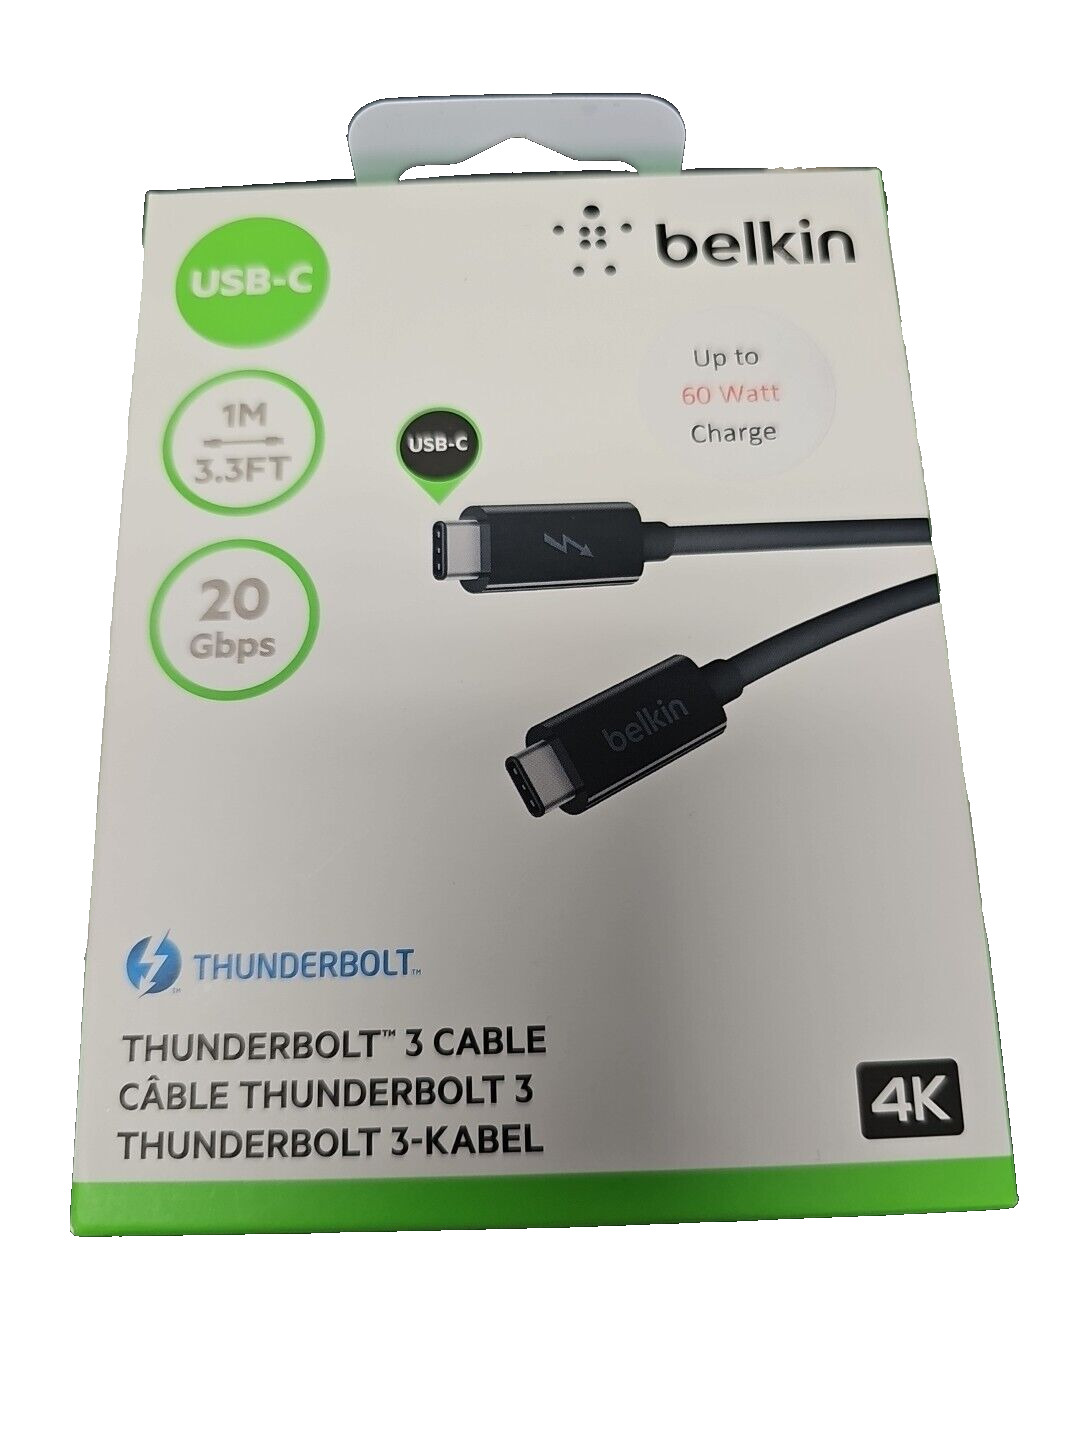 Belkin Thunderbolt 3 Cable 3.3ft 1M 20Gbps - New In Box